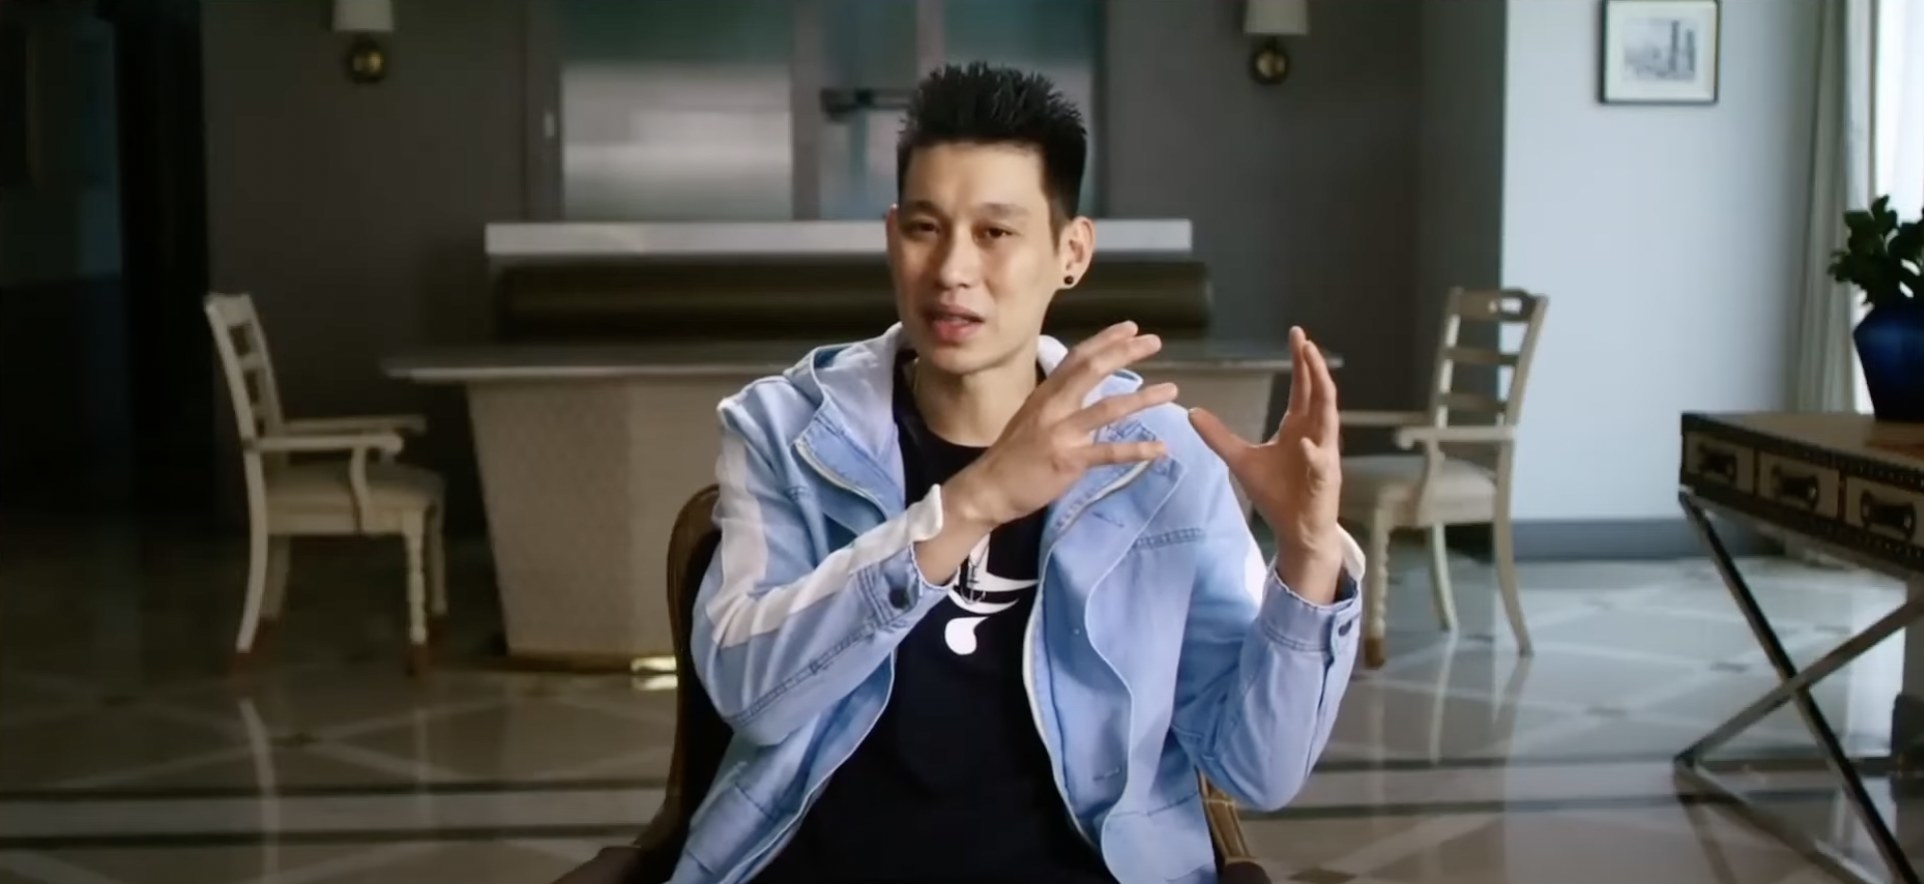 Jeremy Lin in an interview